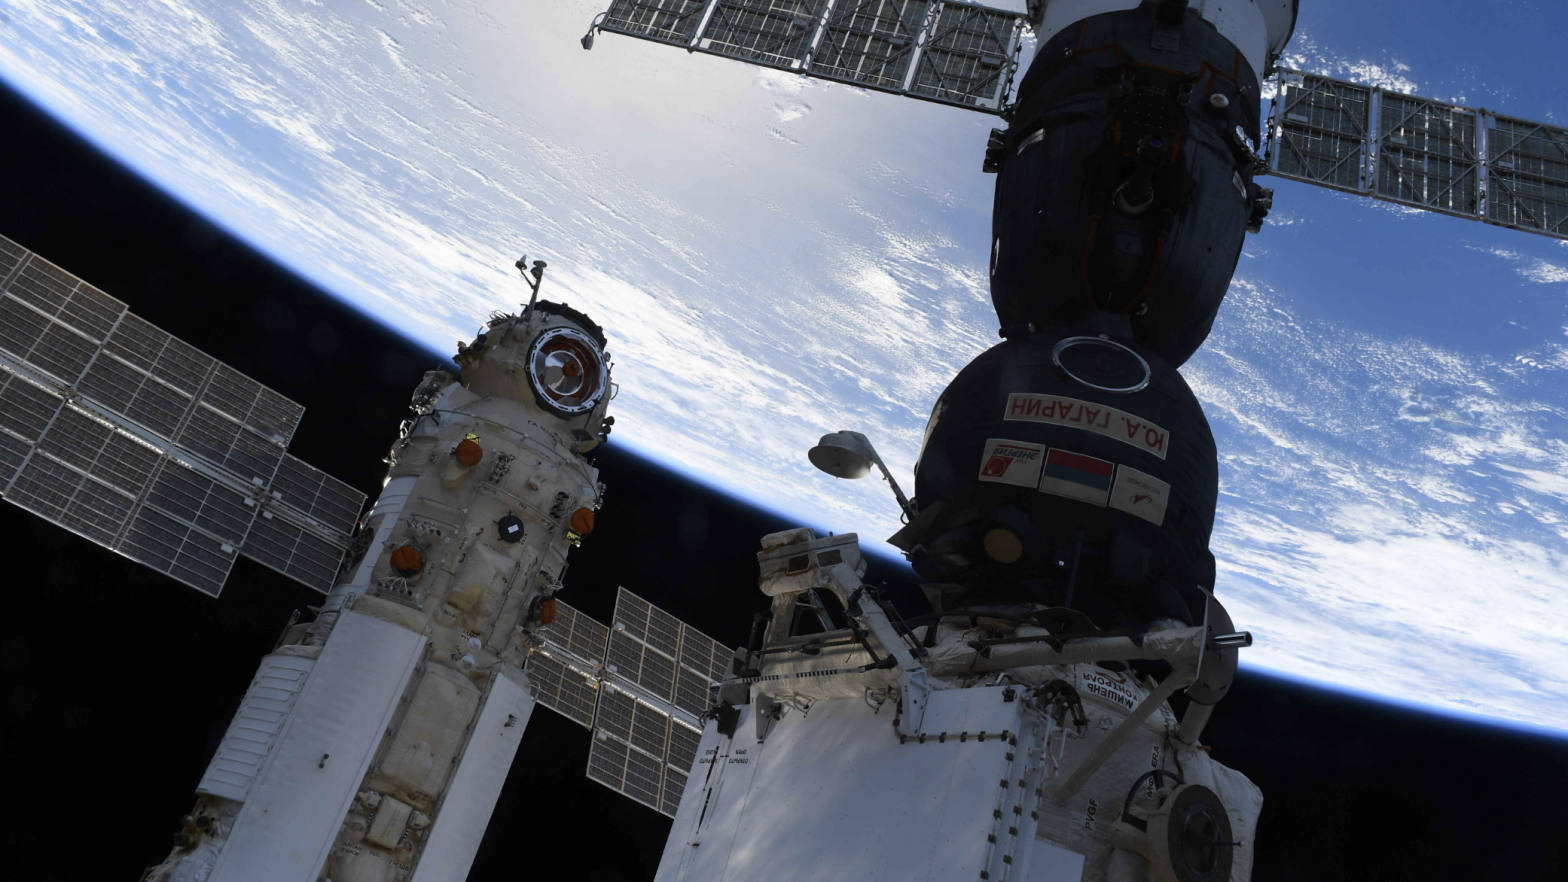 The Nauka module (left) docked to the ISS, with a Soyuz spacecraft (right) parked nearby.  (Image: Roscosmos)